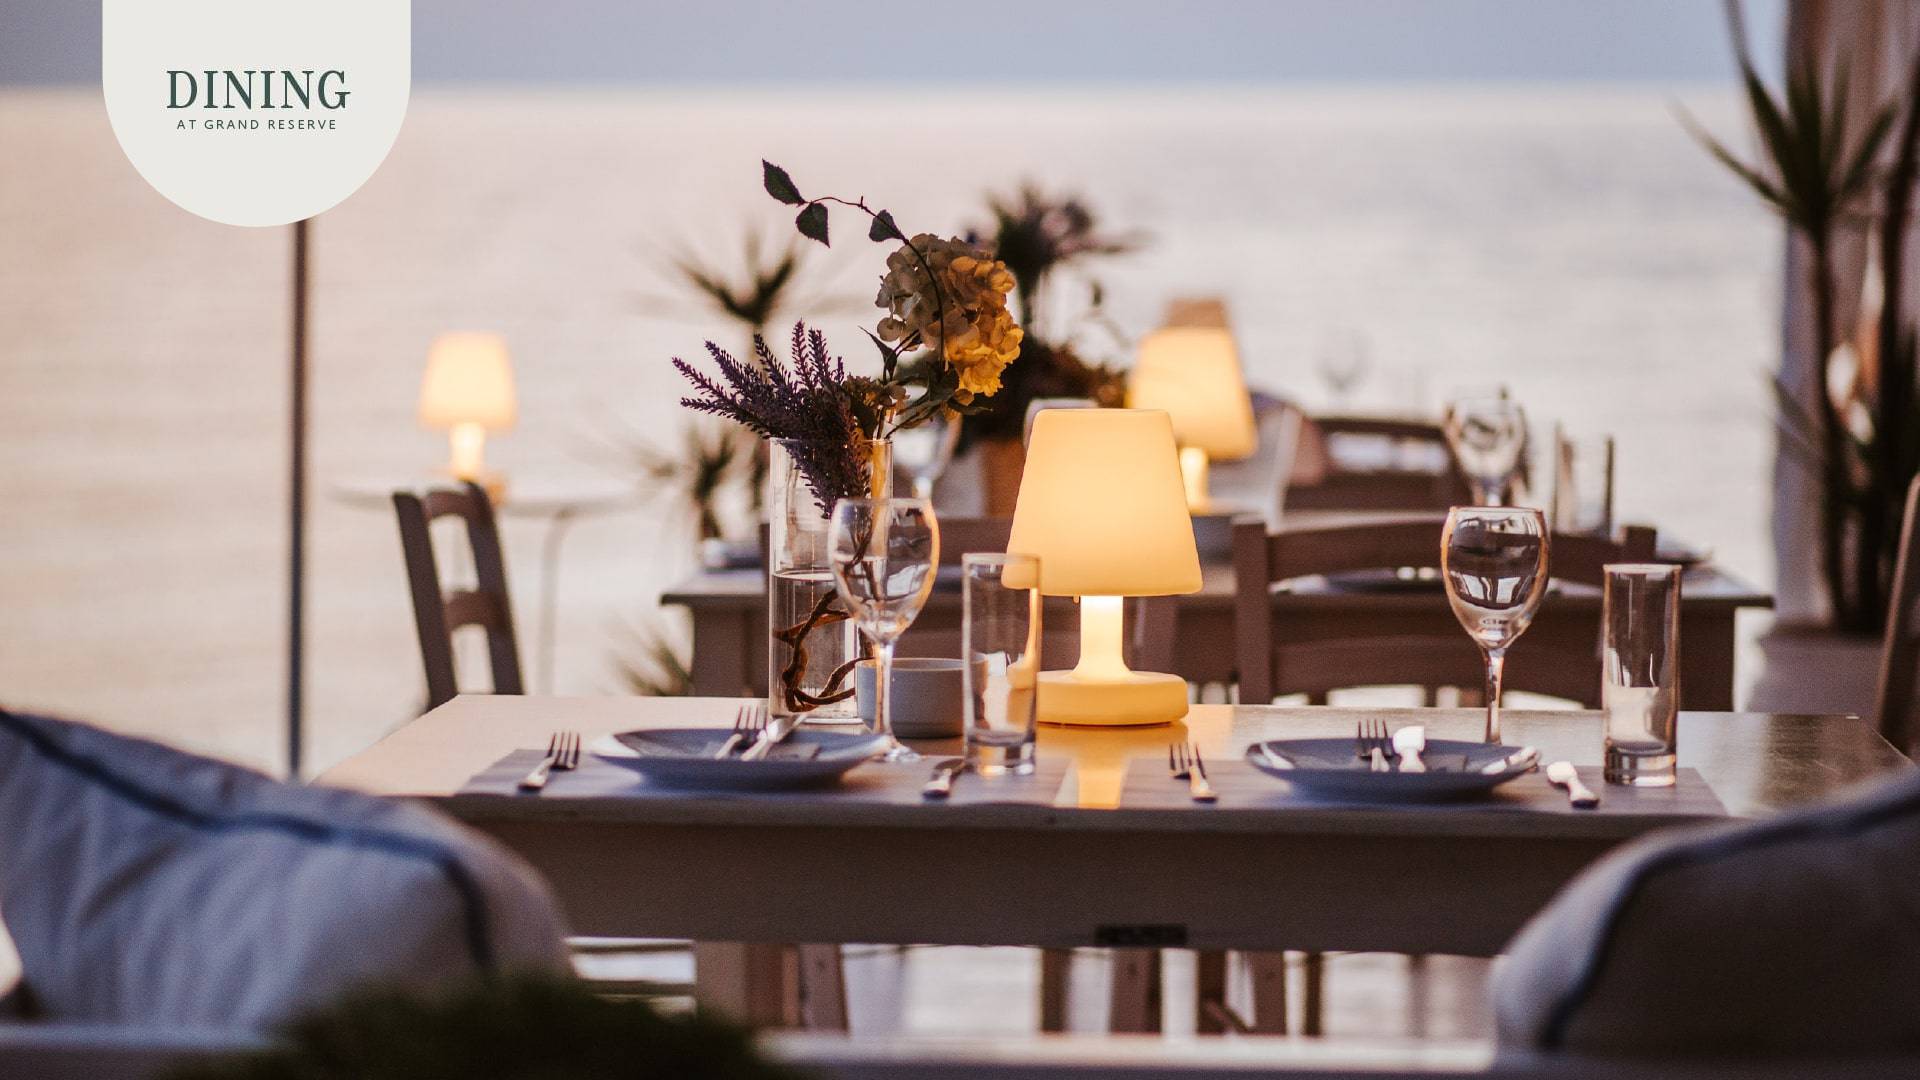 Grand Reserve's dining ambiance at sunset, where guests dine al fresco, enjoying the exquisite flavors and the stunning backdrop of the setting sun.